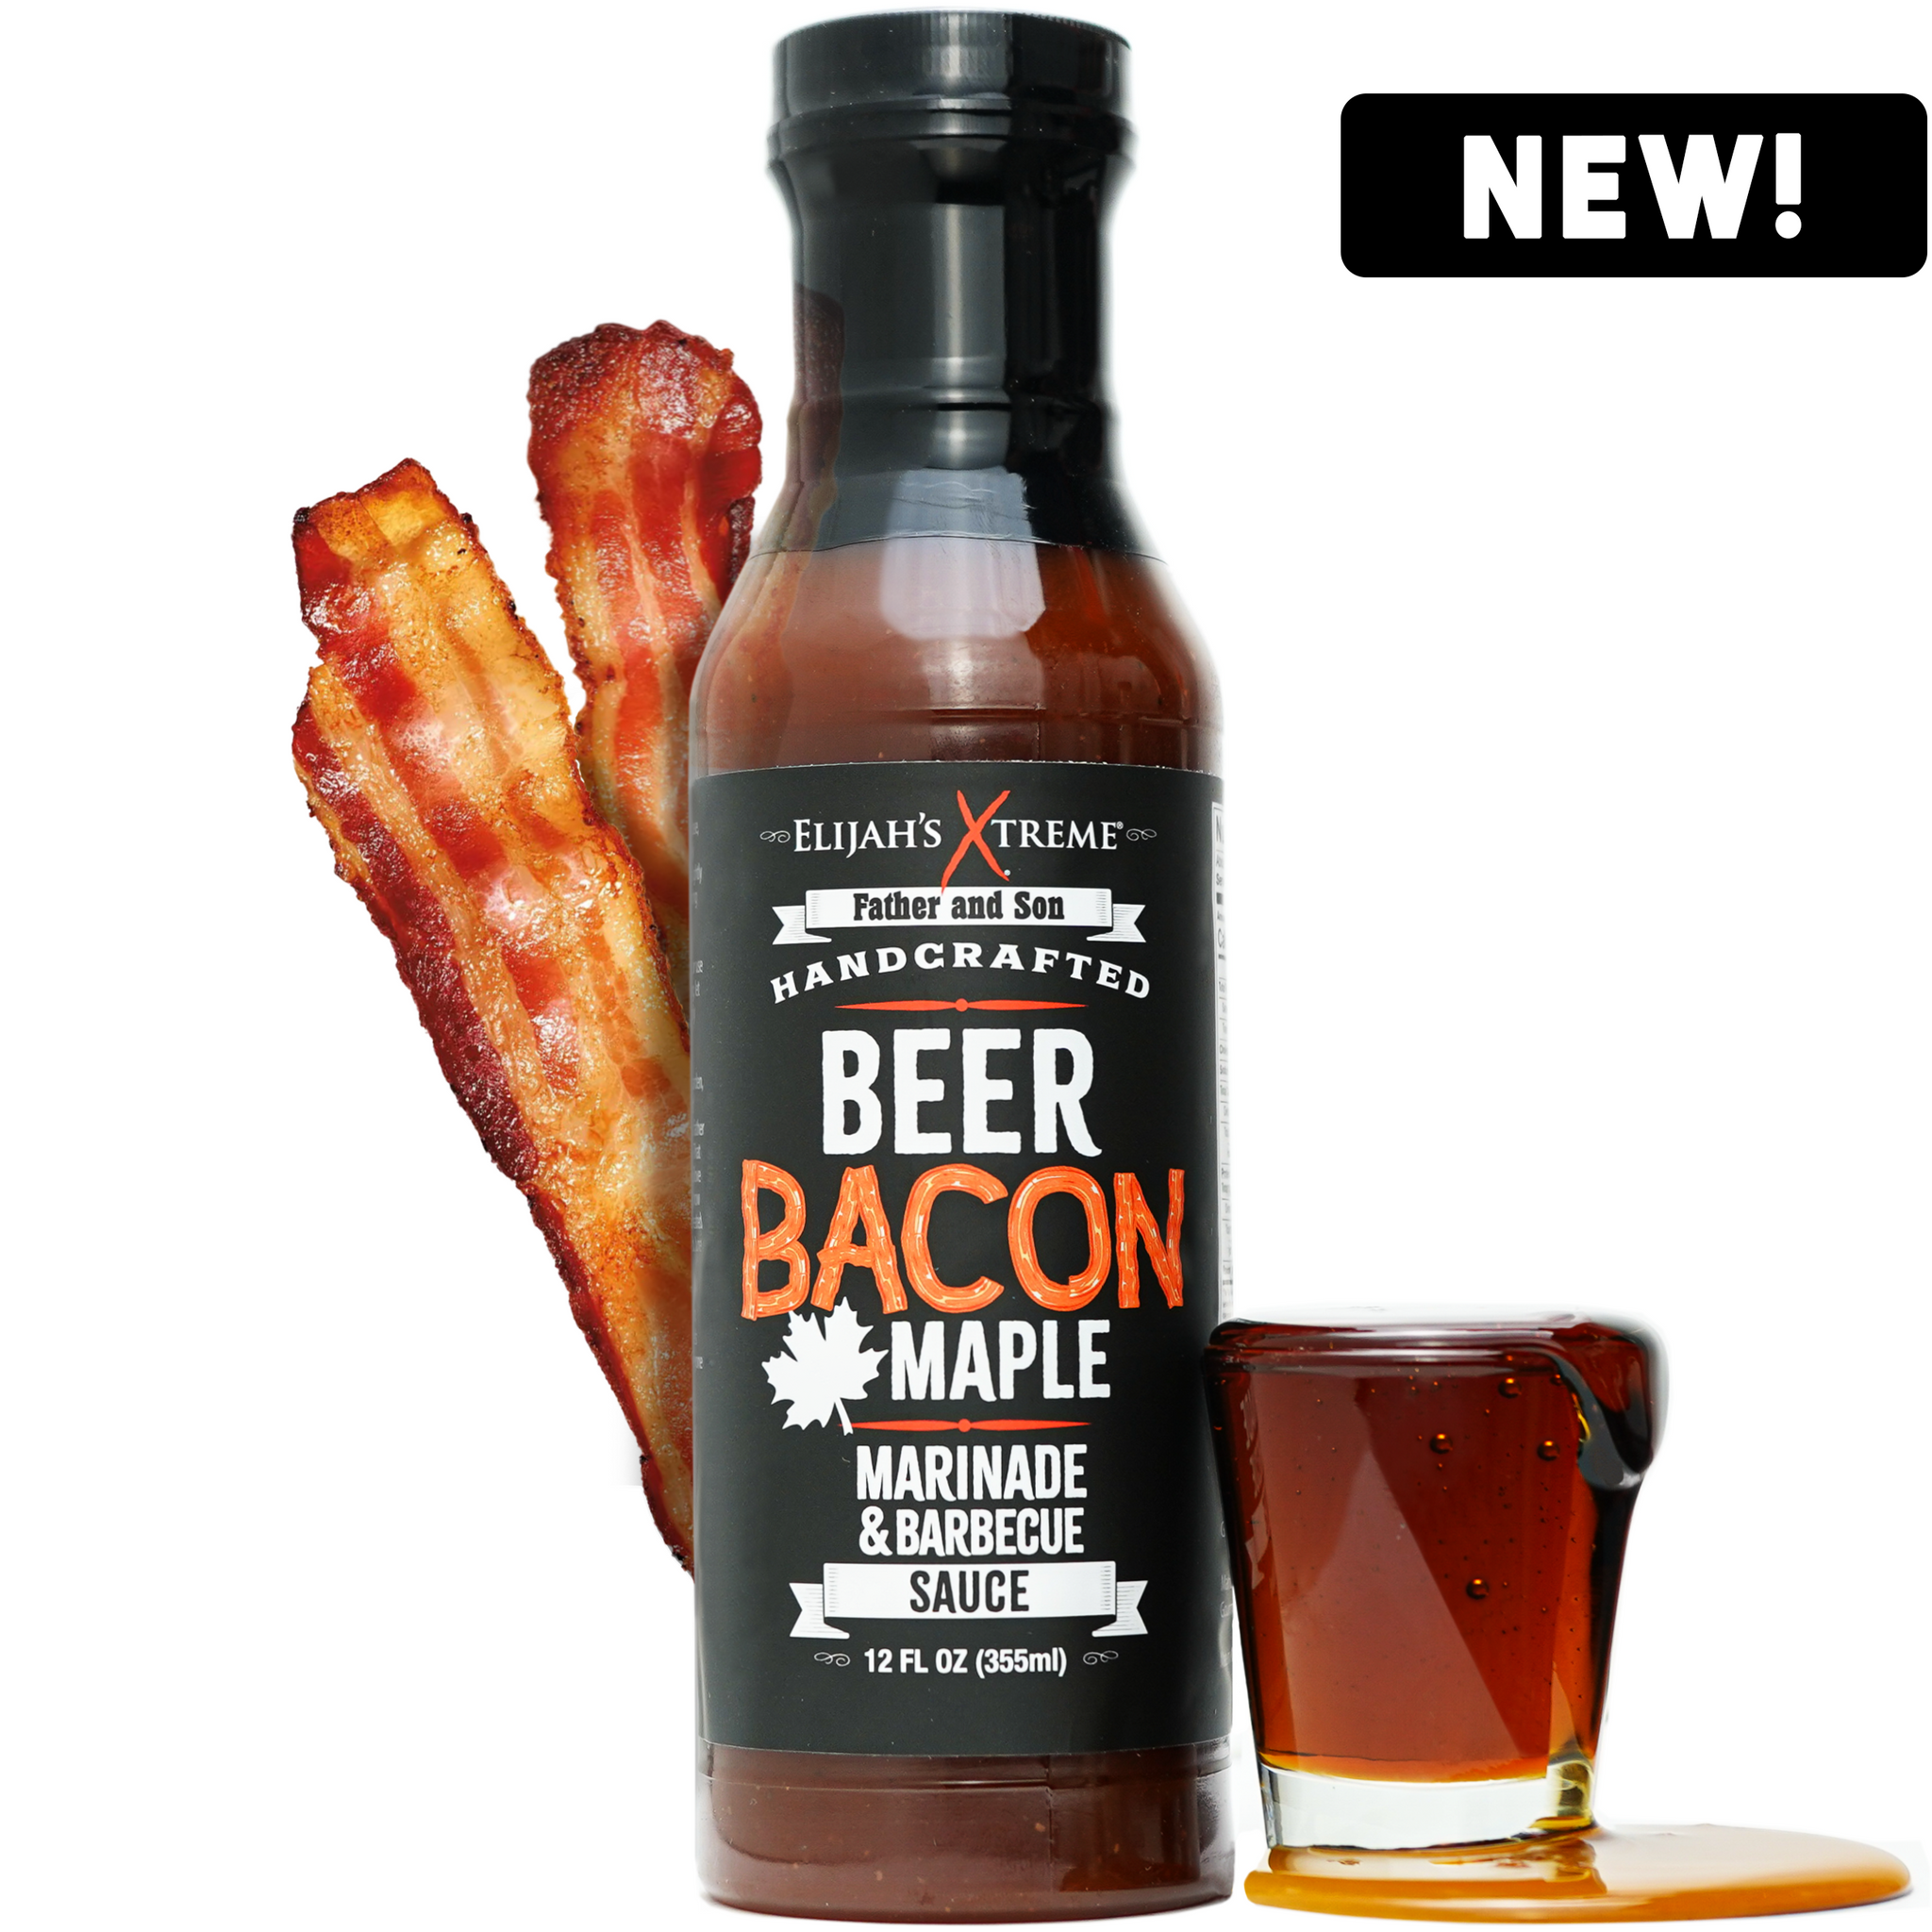 Beer Bacon Maple BBQ Sauce